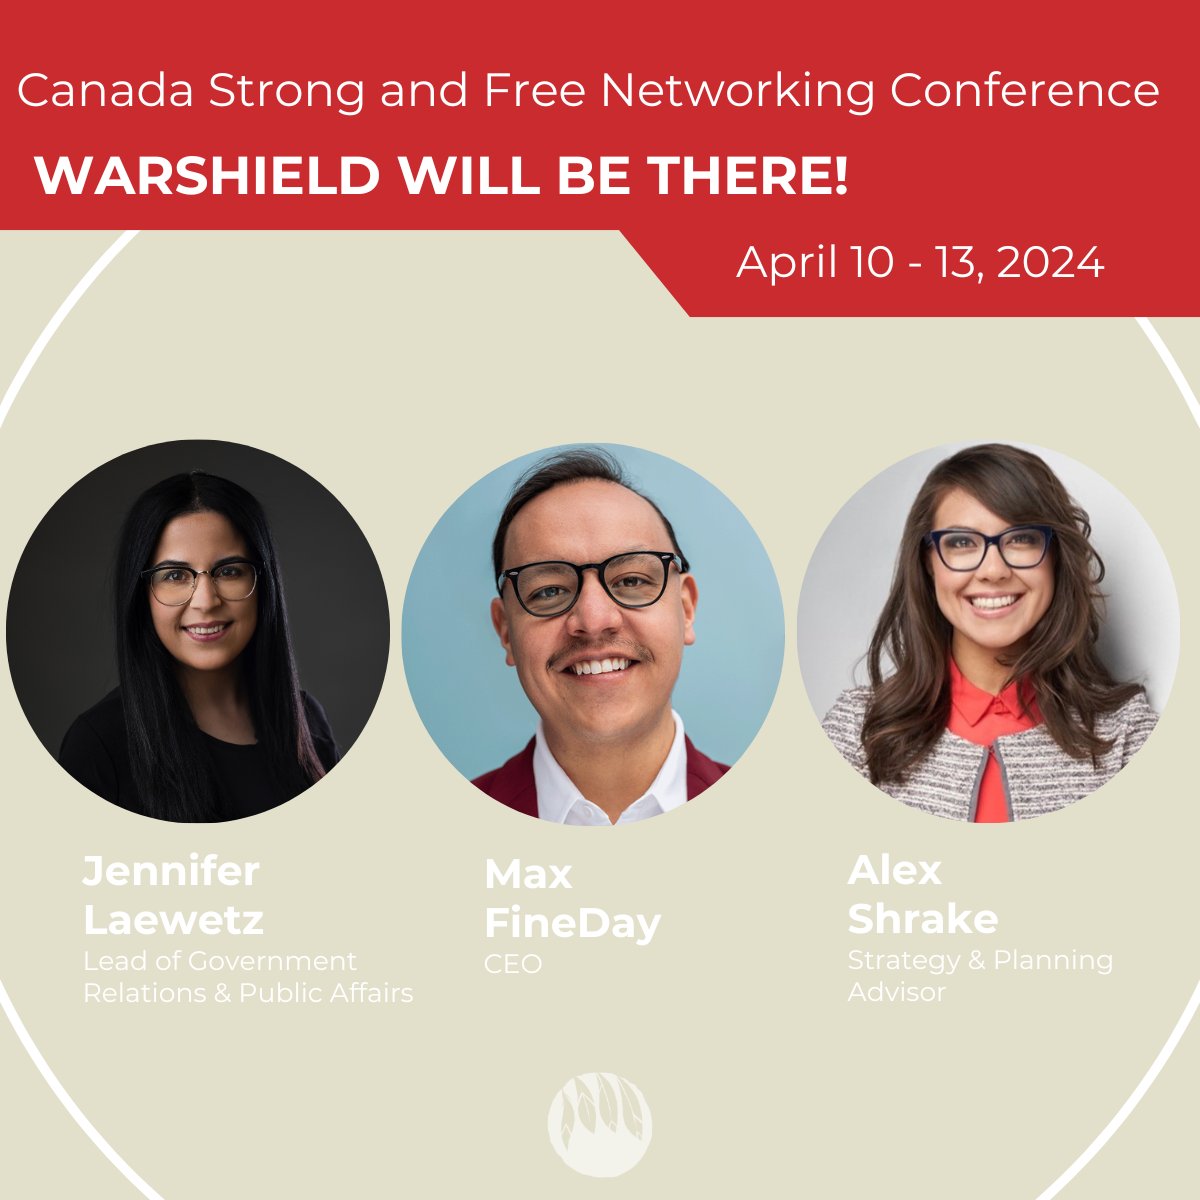 We're excited speaking at the @canstrongfree #CSFNConference in Ottawa this week! Hear from our team as they speak on #Indigenous advocacy, clean energy and politics. Are you in town? Reach out to our onsite team and we would love to set up time to connect! #cndpoli #FirstNations